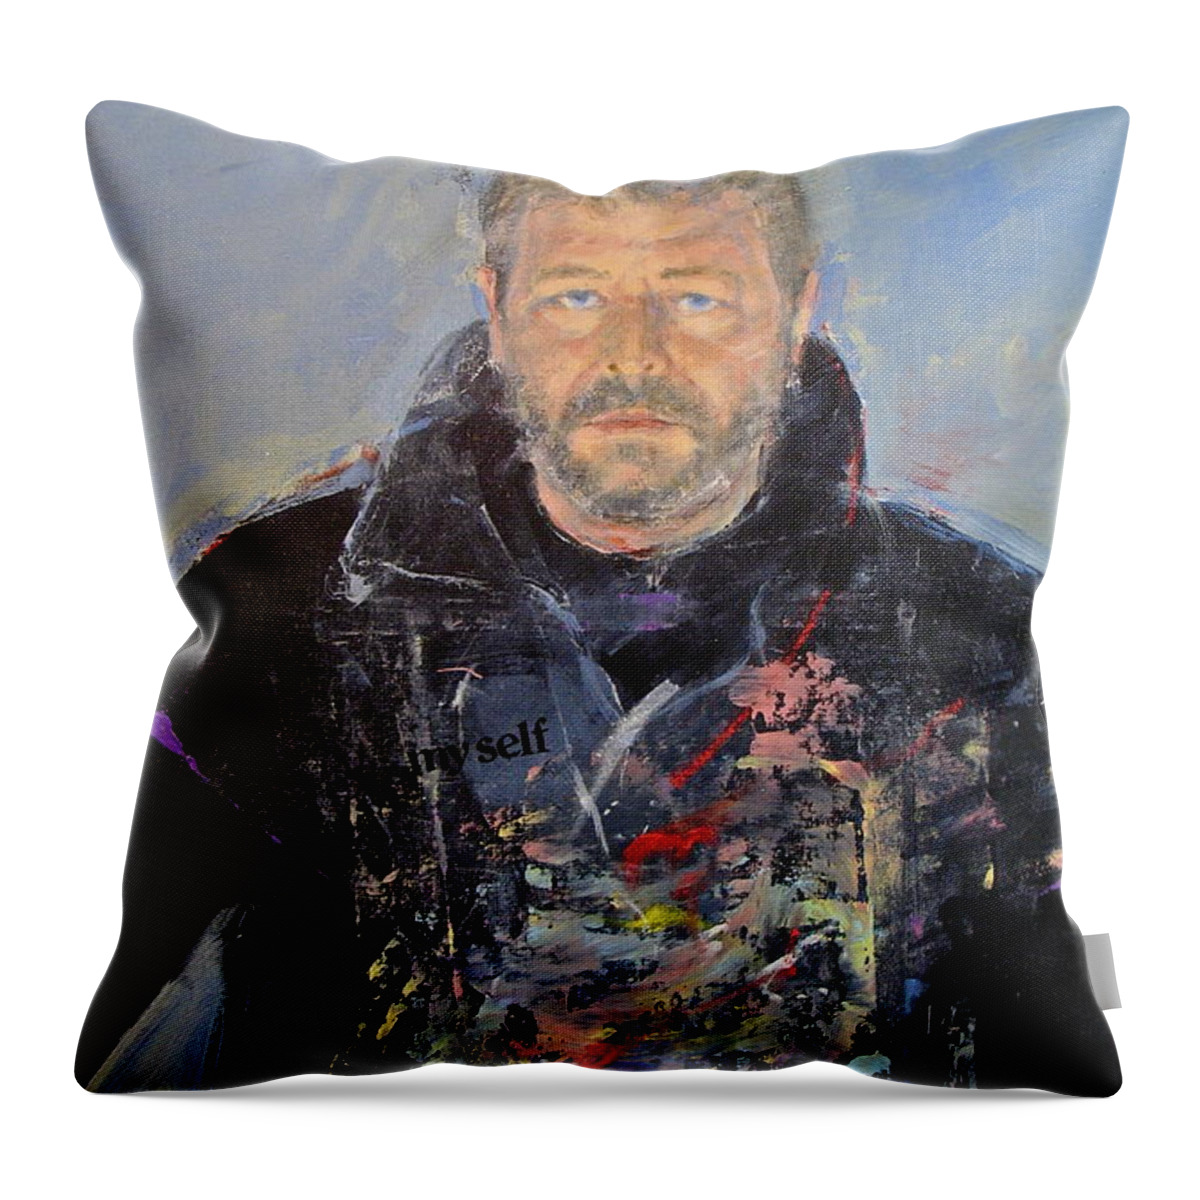 Abstract Painting Throw Pillow featuring the painting Mine Self Up Lit Downtrodden Side Swiped and Chickadeed by Cliff Spohn